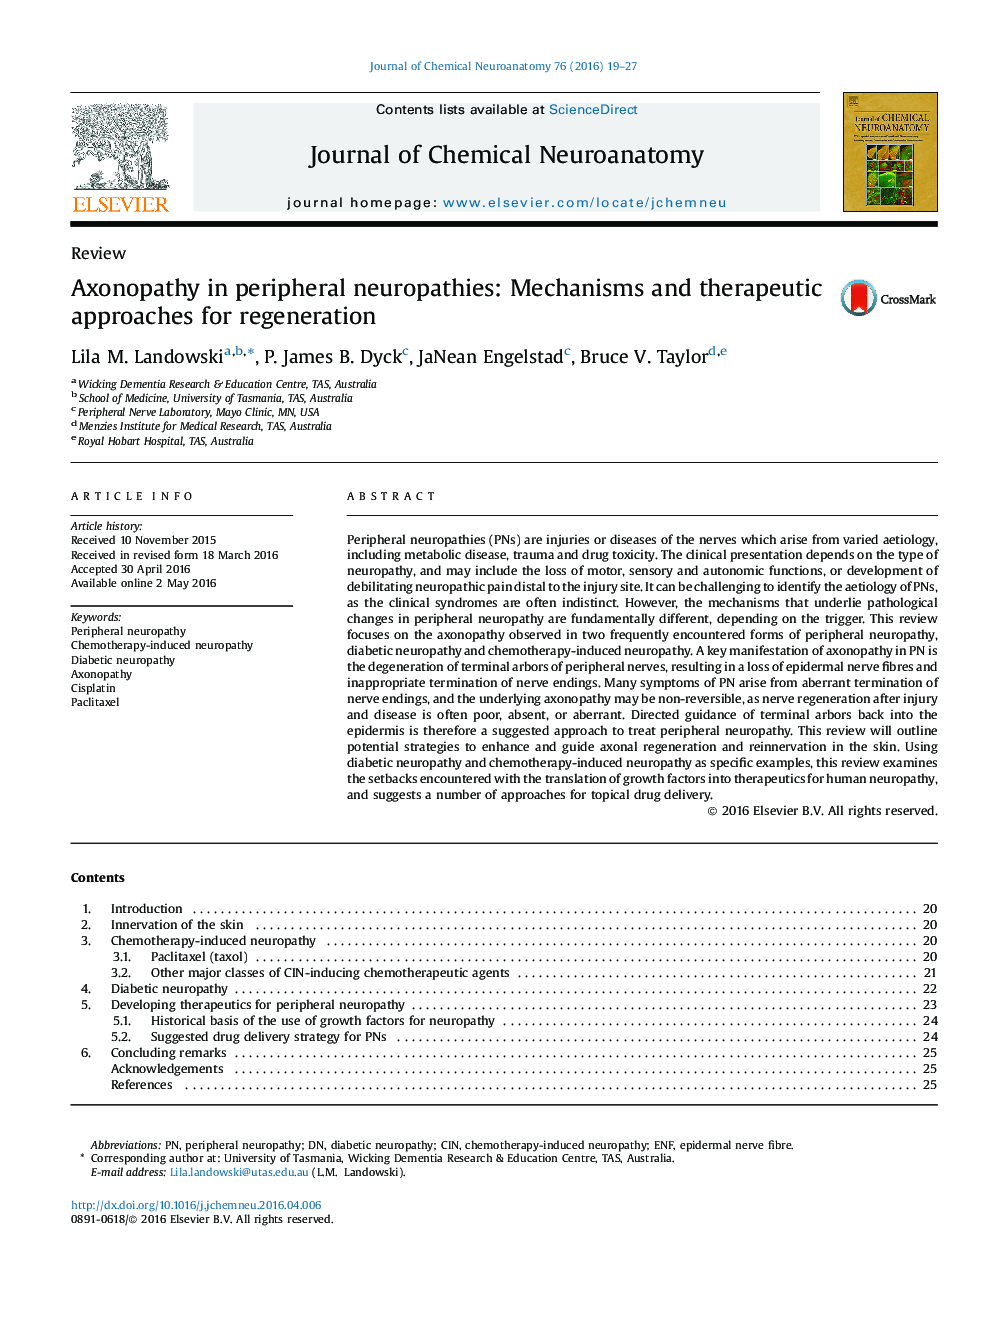 Axonopathy in peripheral neuropathies: Mechanisms and therapeutic approaches for regeneration